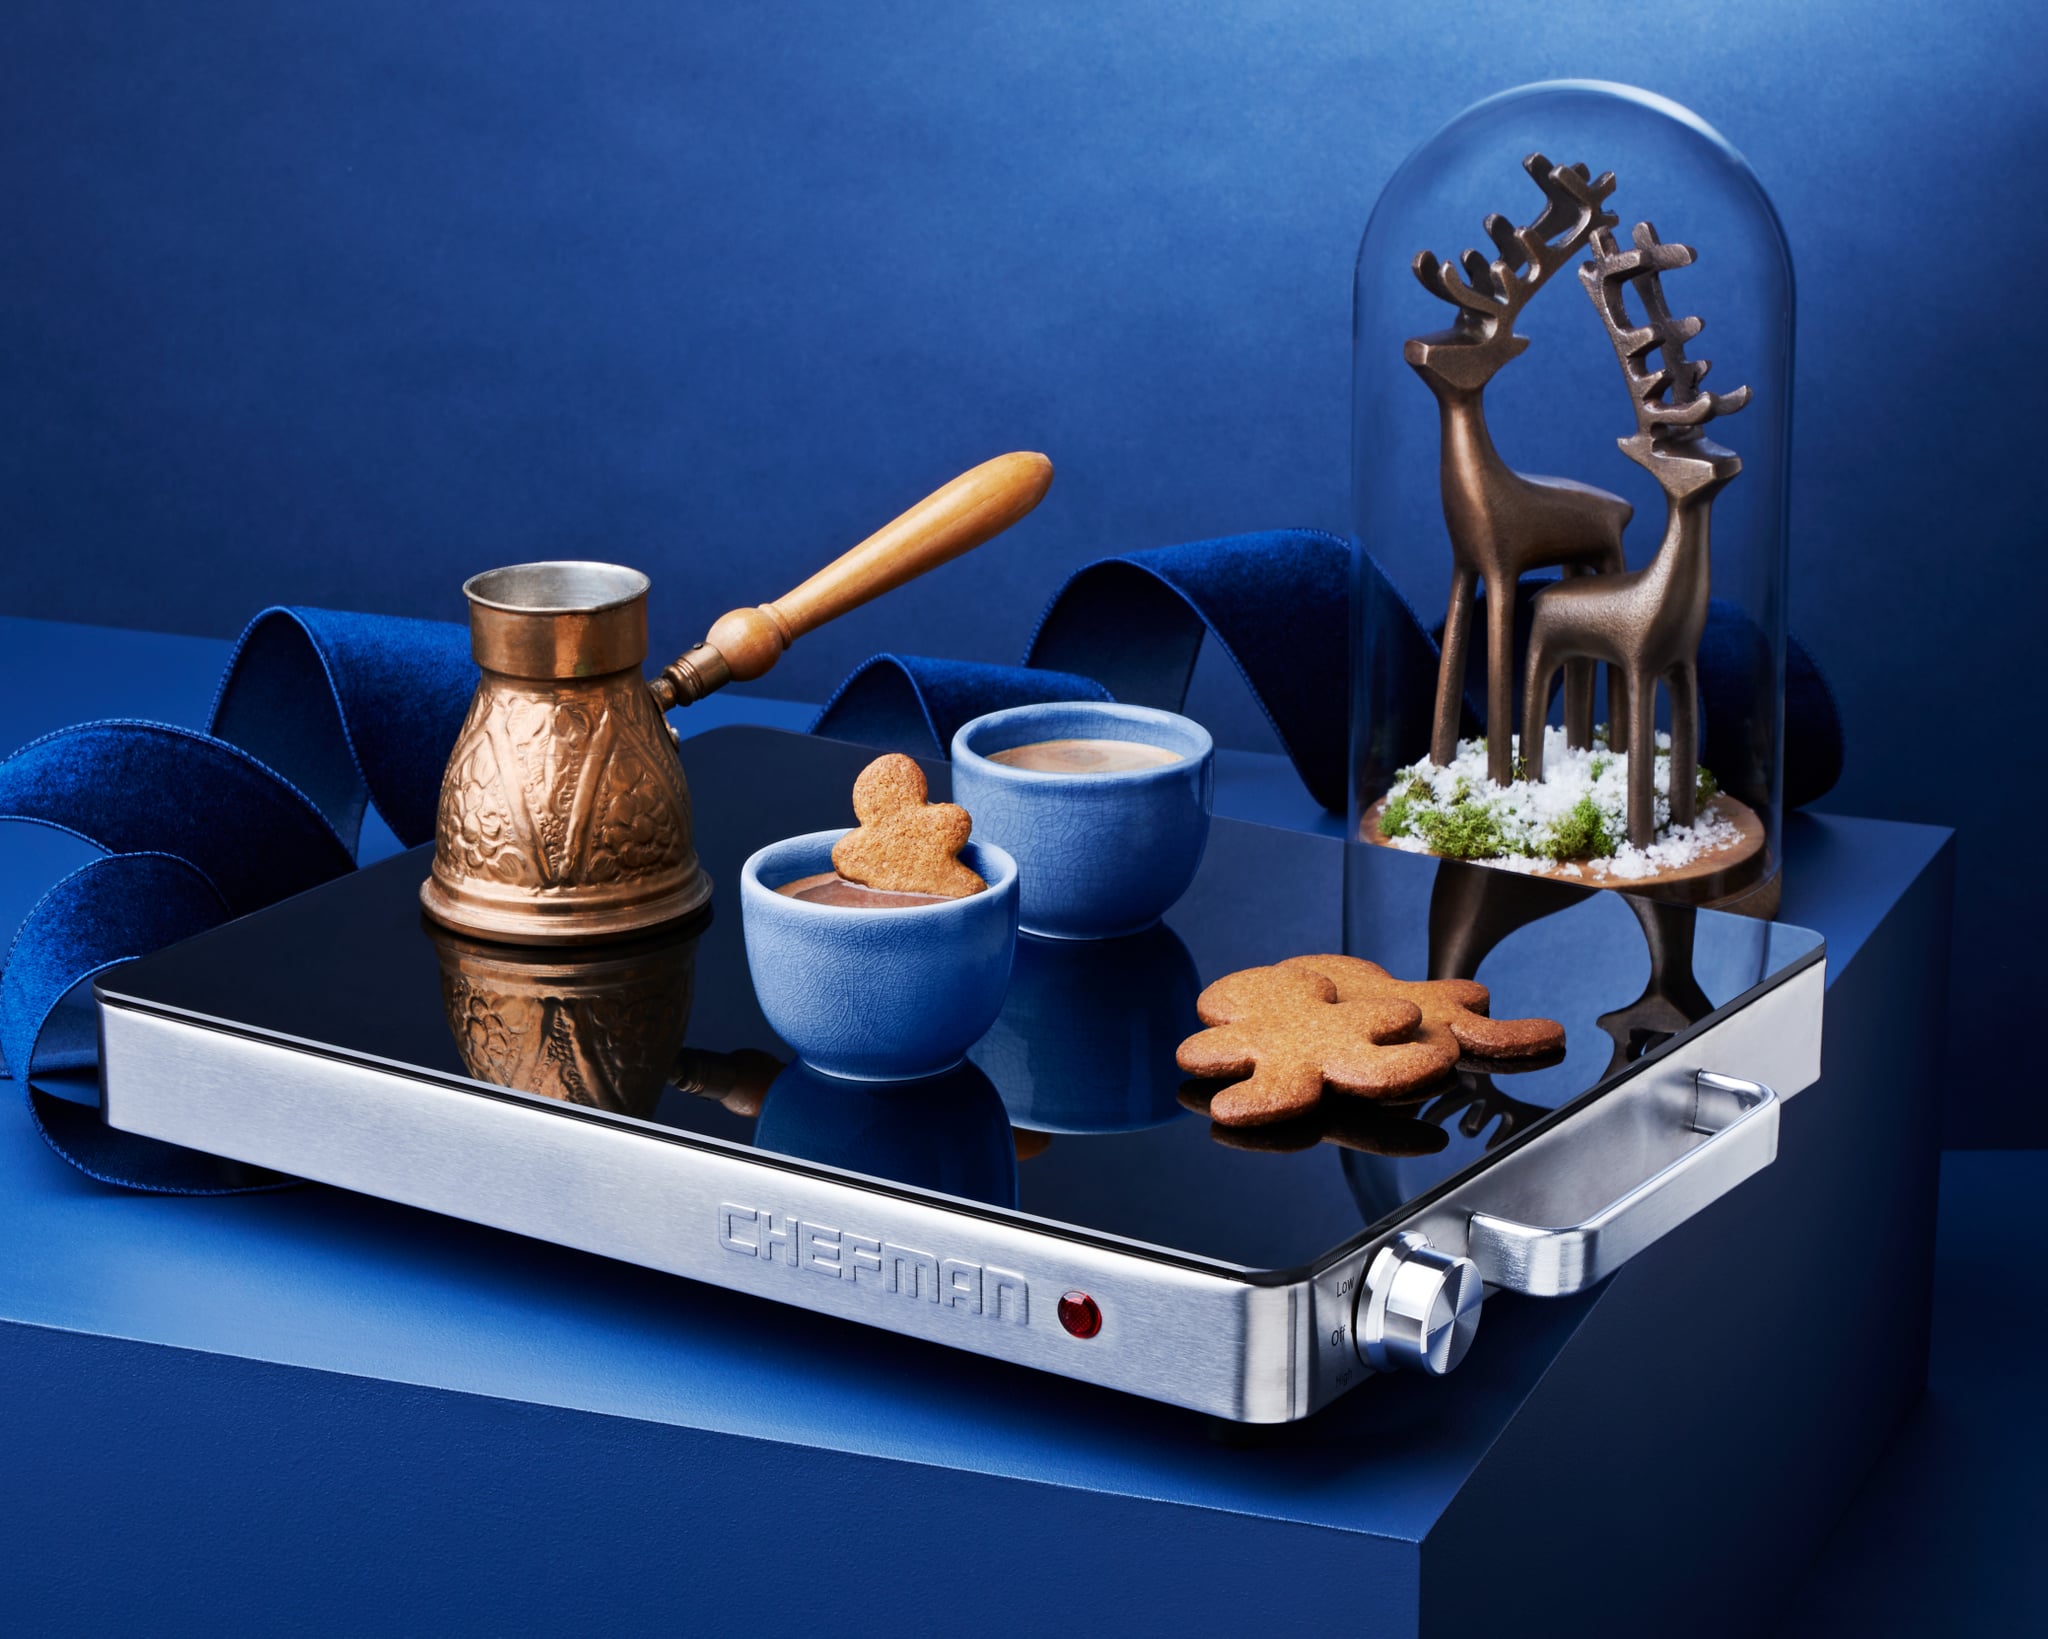 Chefman Electric Warming Tray, The Best  Gifts For the Entertainer  in Your Life